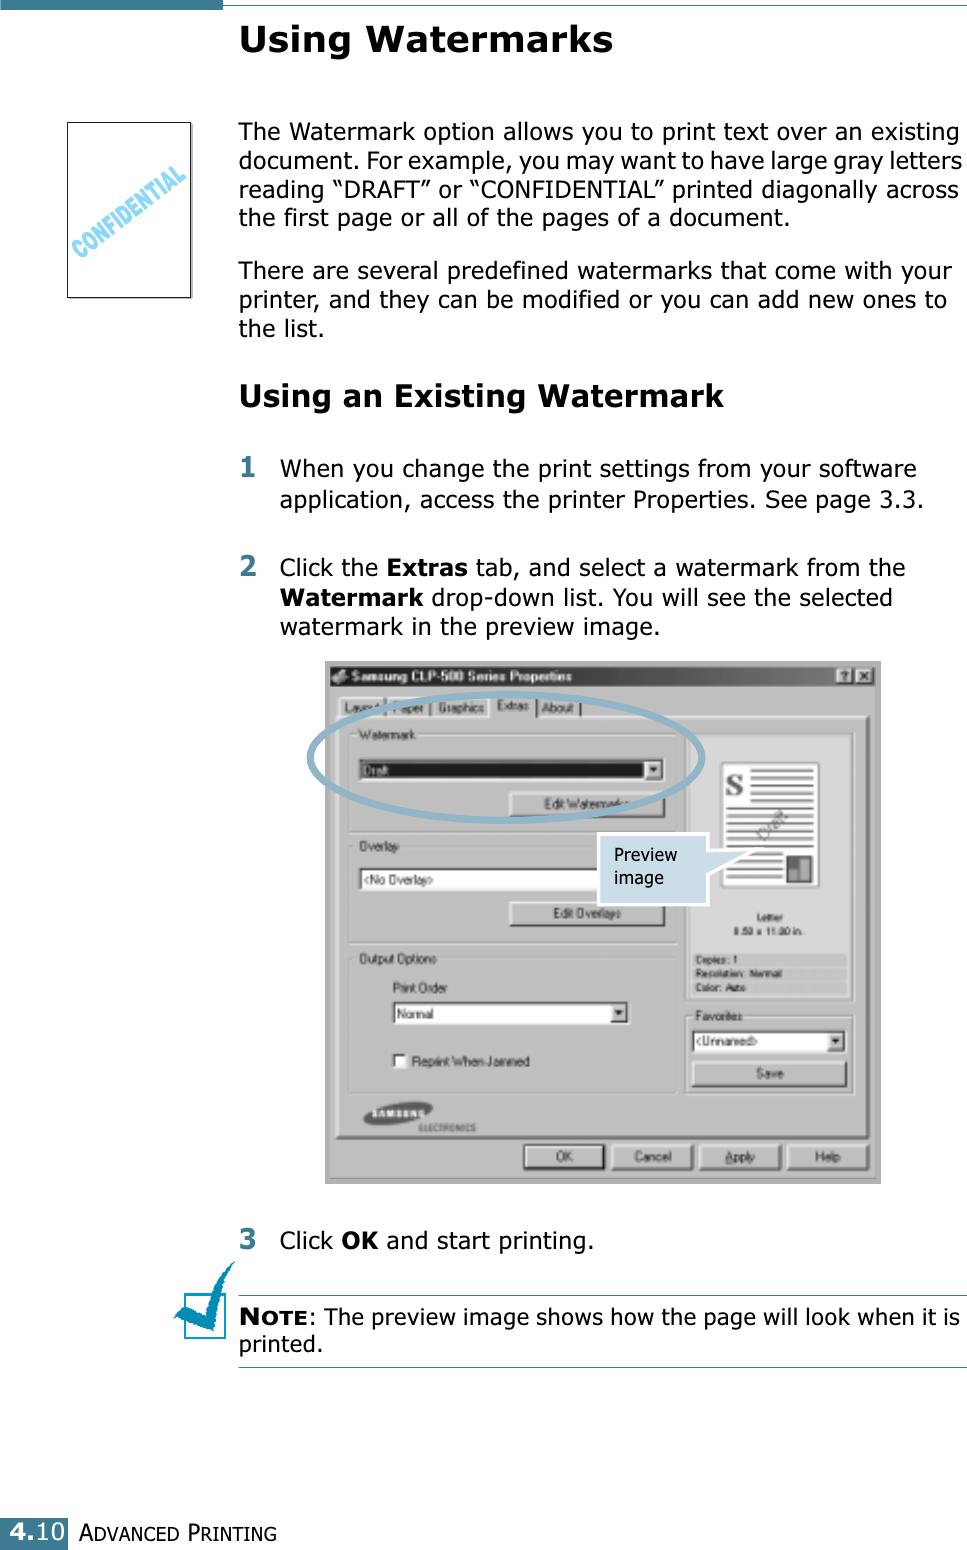 ADVANCED PRINTING4.10Using WatermarksThe Watermark option allows you to print text over an existing document. For example, you may want to have large gray letters reading “DRAFT” or “CONFIDENTIAL” printed diagonally across the first page or all of the pages of a document. There are several predefined watermarks that come with your printer, and they can be modified or you can add new ones to the list. Using an Existing Watermark1When you change the print settings from your software application, access the printer Properties. See page 3.3. 2Click the Extras tab, and select a watermark from the Watermark drop-down list. You will see the selected watermark in the preview image. 3Click OK and start printing. NOTE: The preview image shows how the page will look when it is printed.Preview image